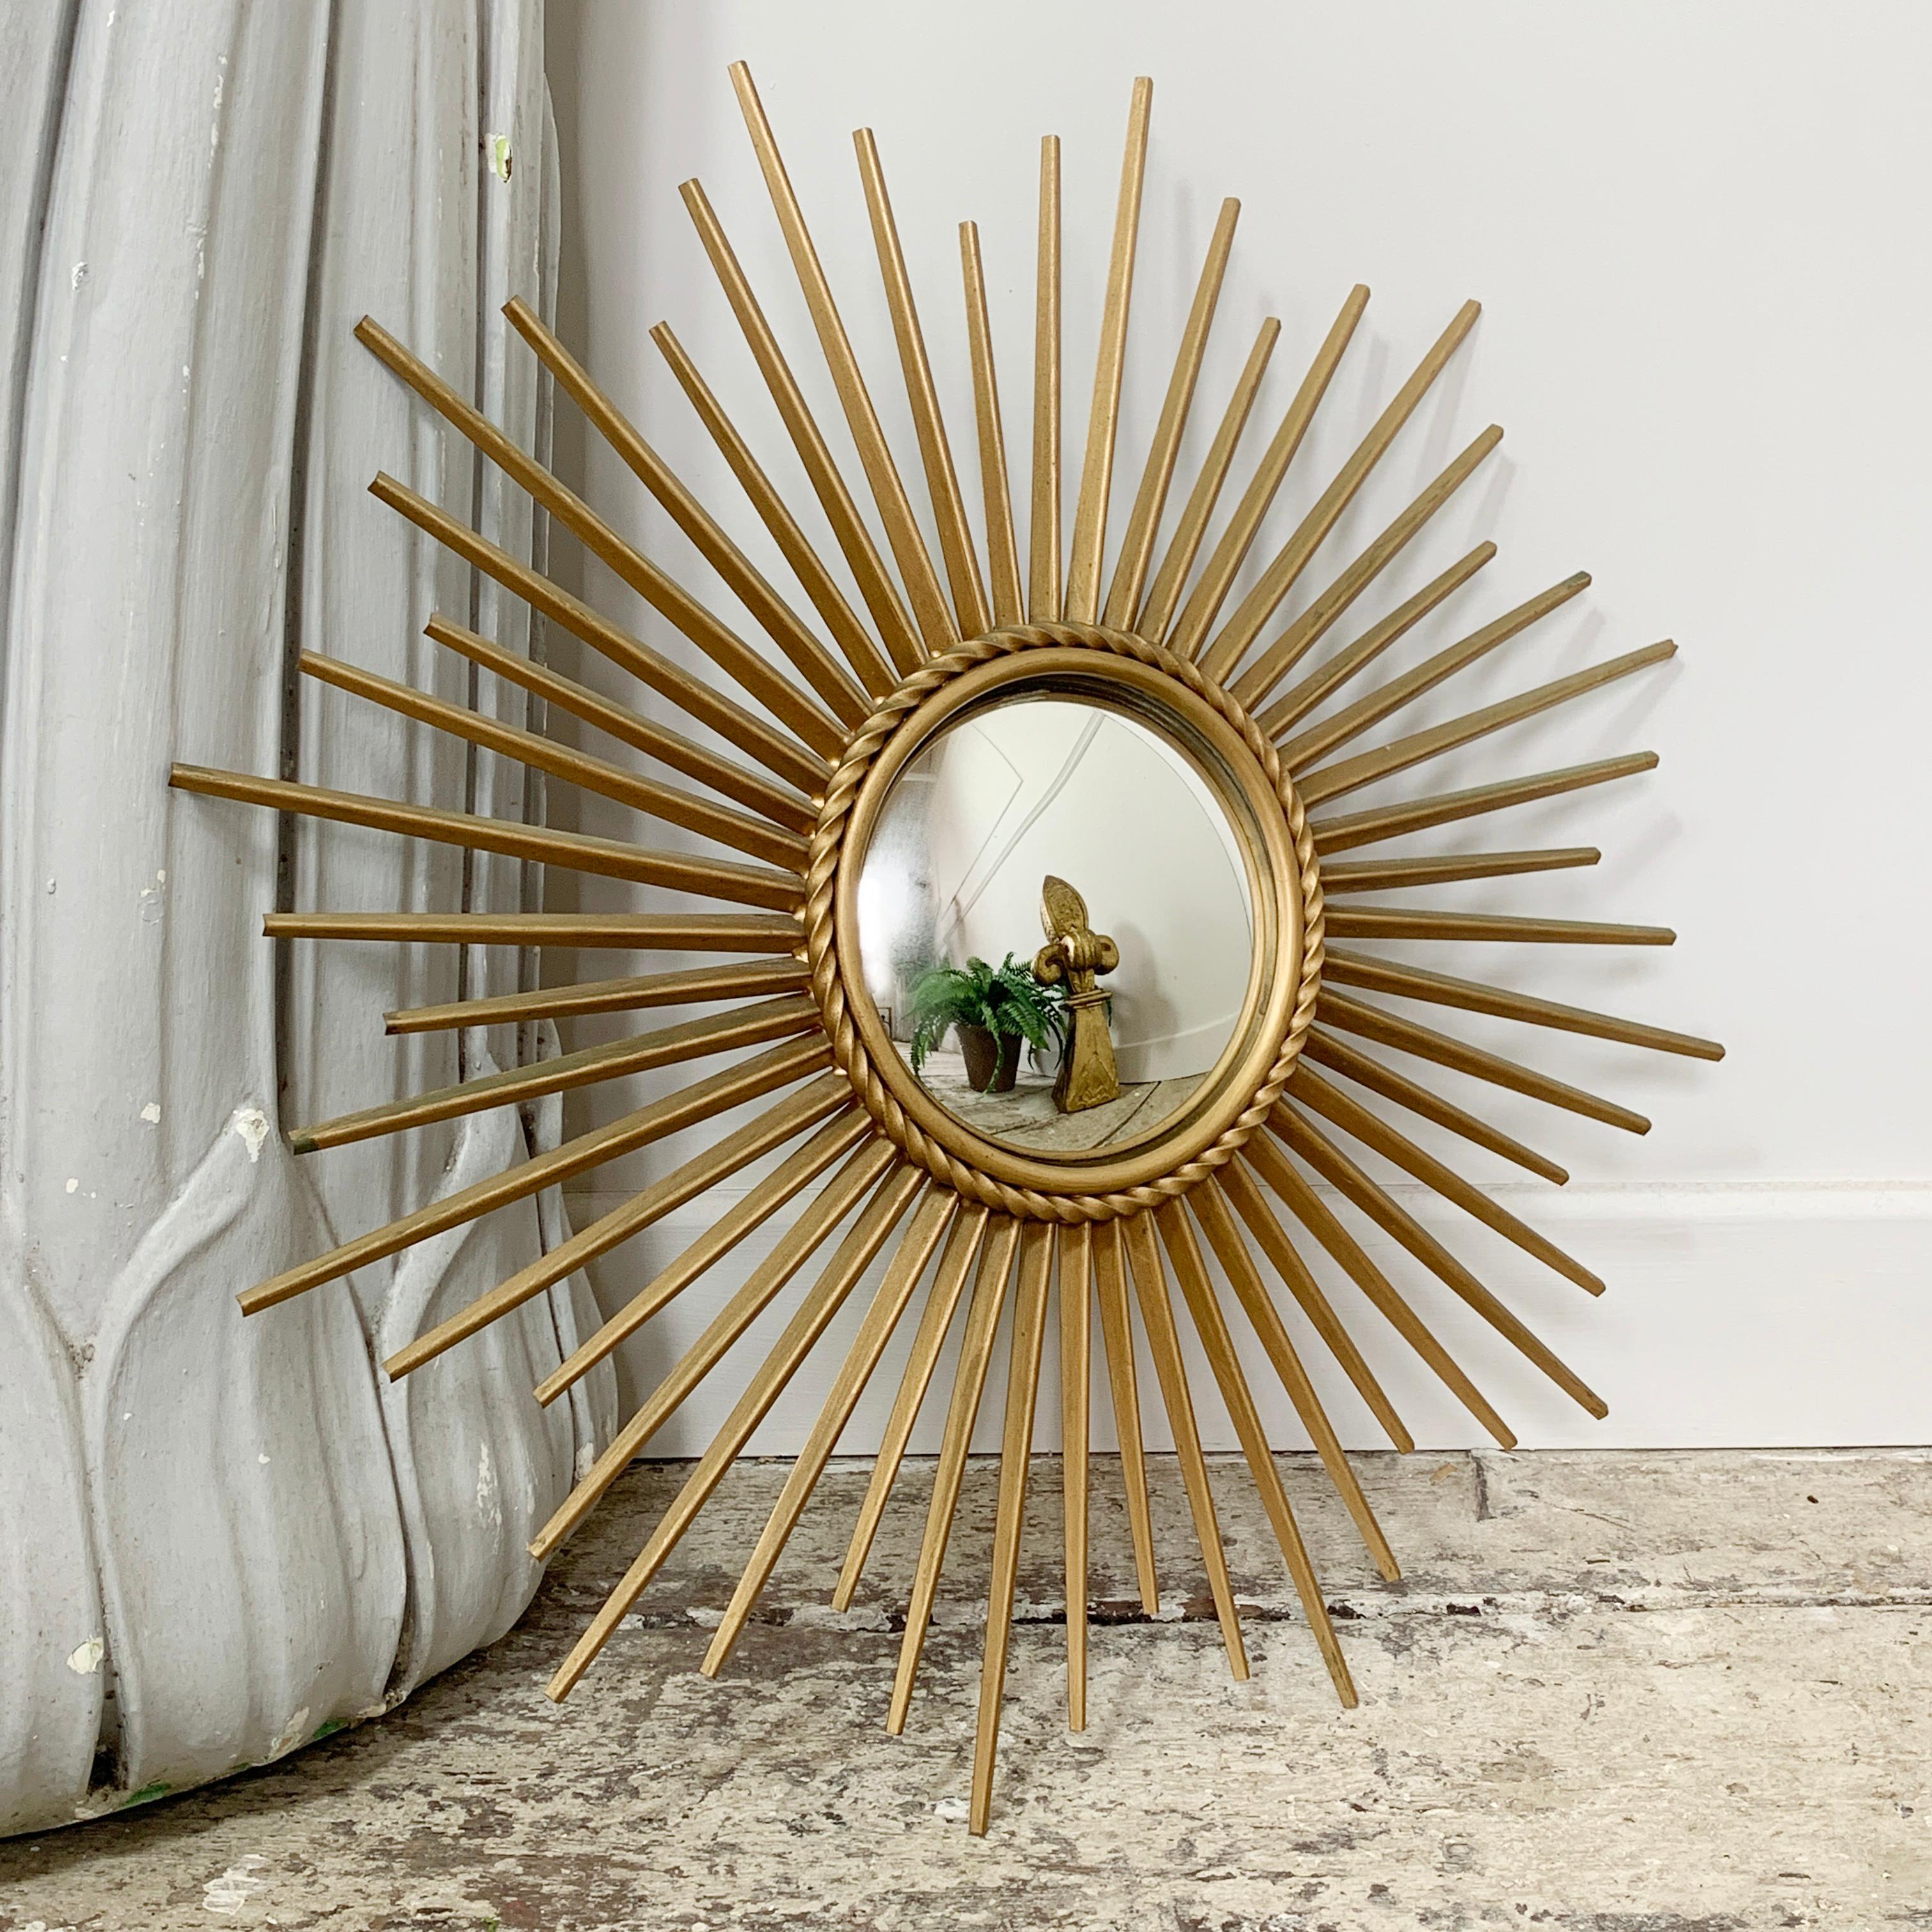 Chaty Vallauris sunburst mirror, original sorciere convex glass

France, 1950s

Fully Stamped on the reverse 'chaty vallauris’

Excellent condition for age and a great size

Measures: Width 51 cm, depth 3 cm, mirror 14 cm.